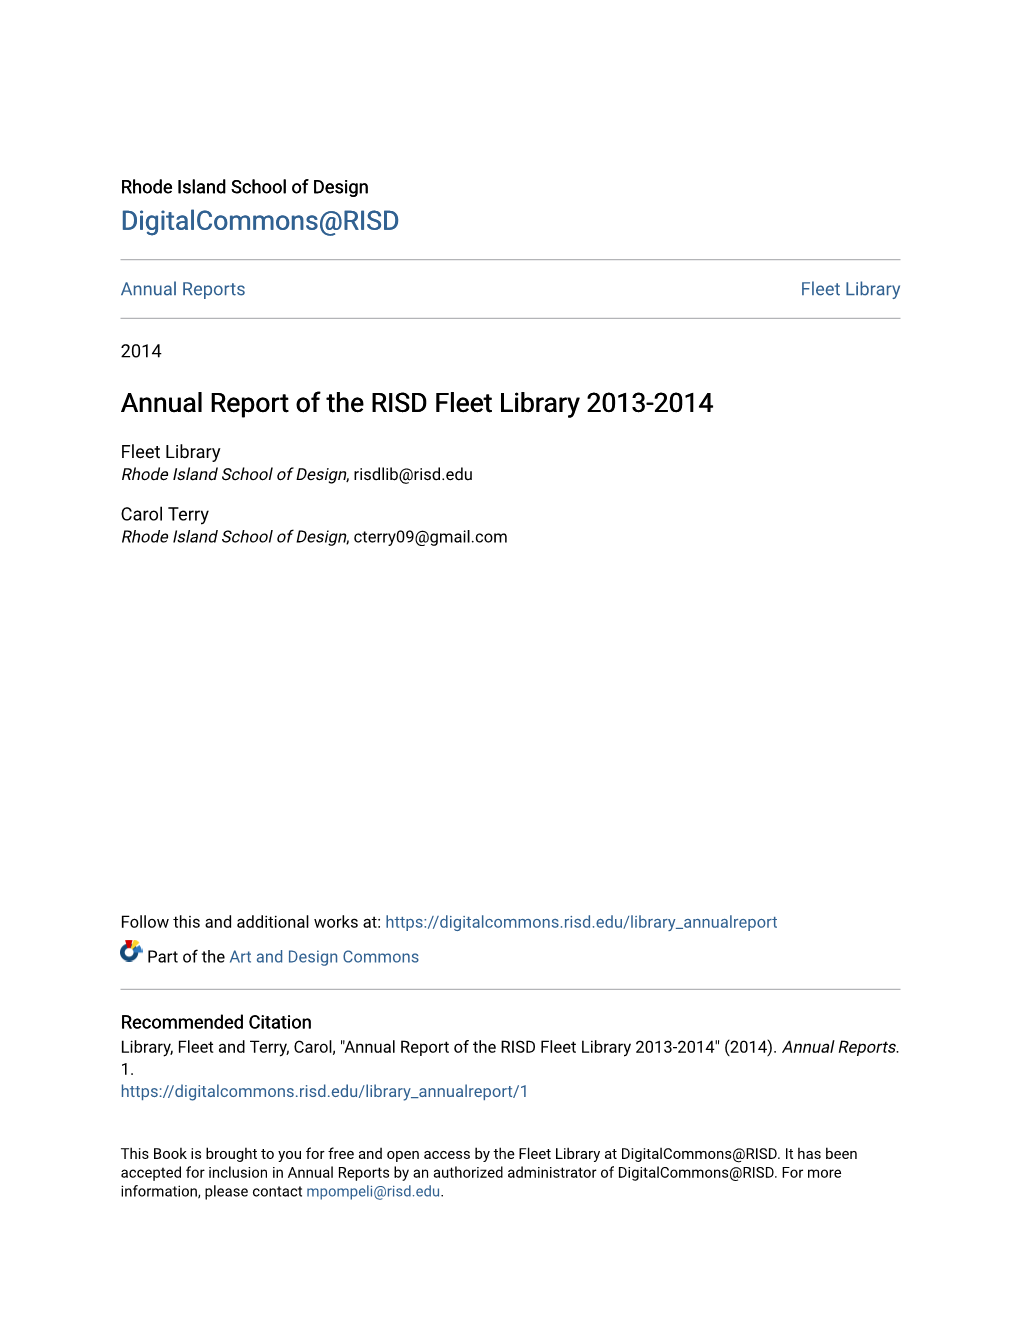 Annual Report of the RISD Fleet Library 2013-2014